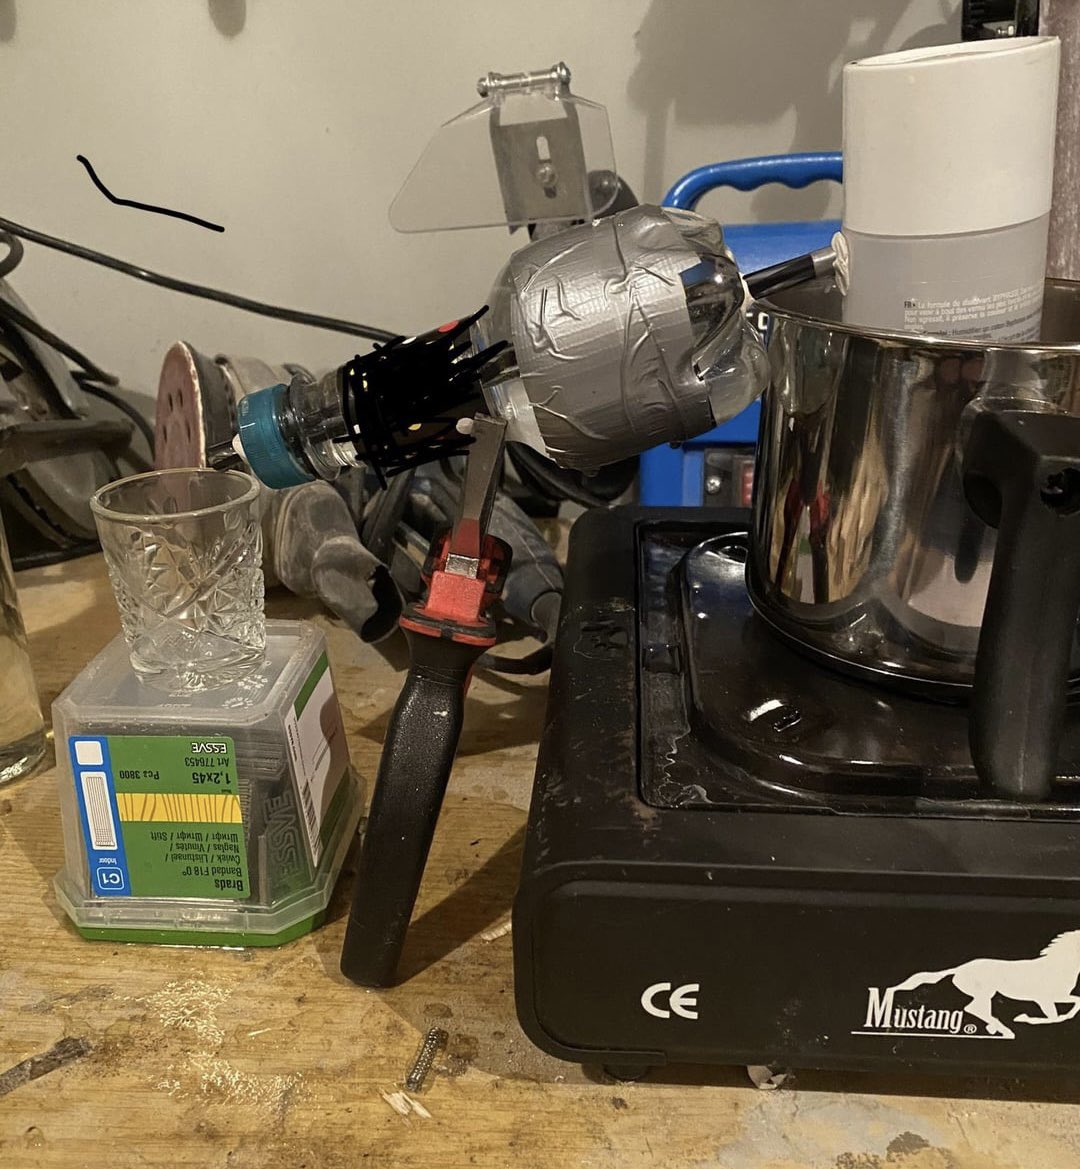 Most cursed distillation setup I have ever seen on the internet. He is distilling acetone…. That thing is made from plastic and heated using an open flame. A+ for creativity and dedication though.